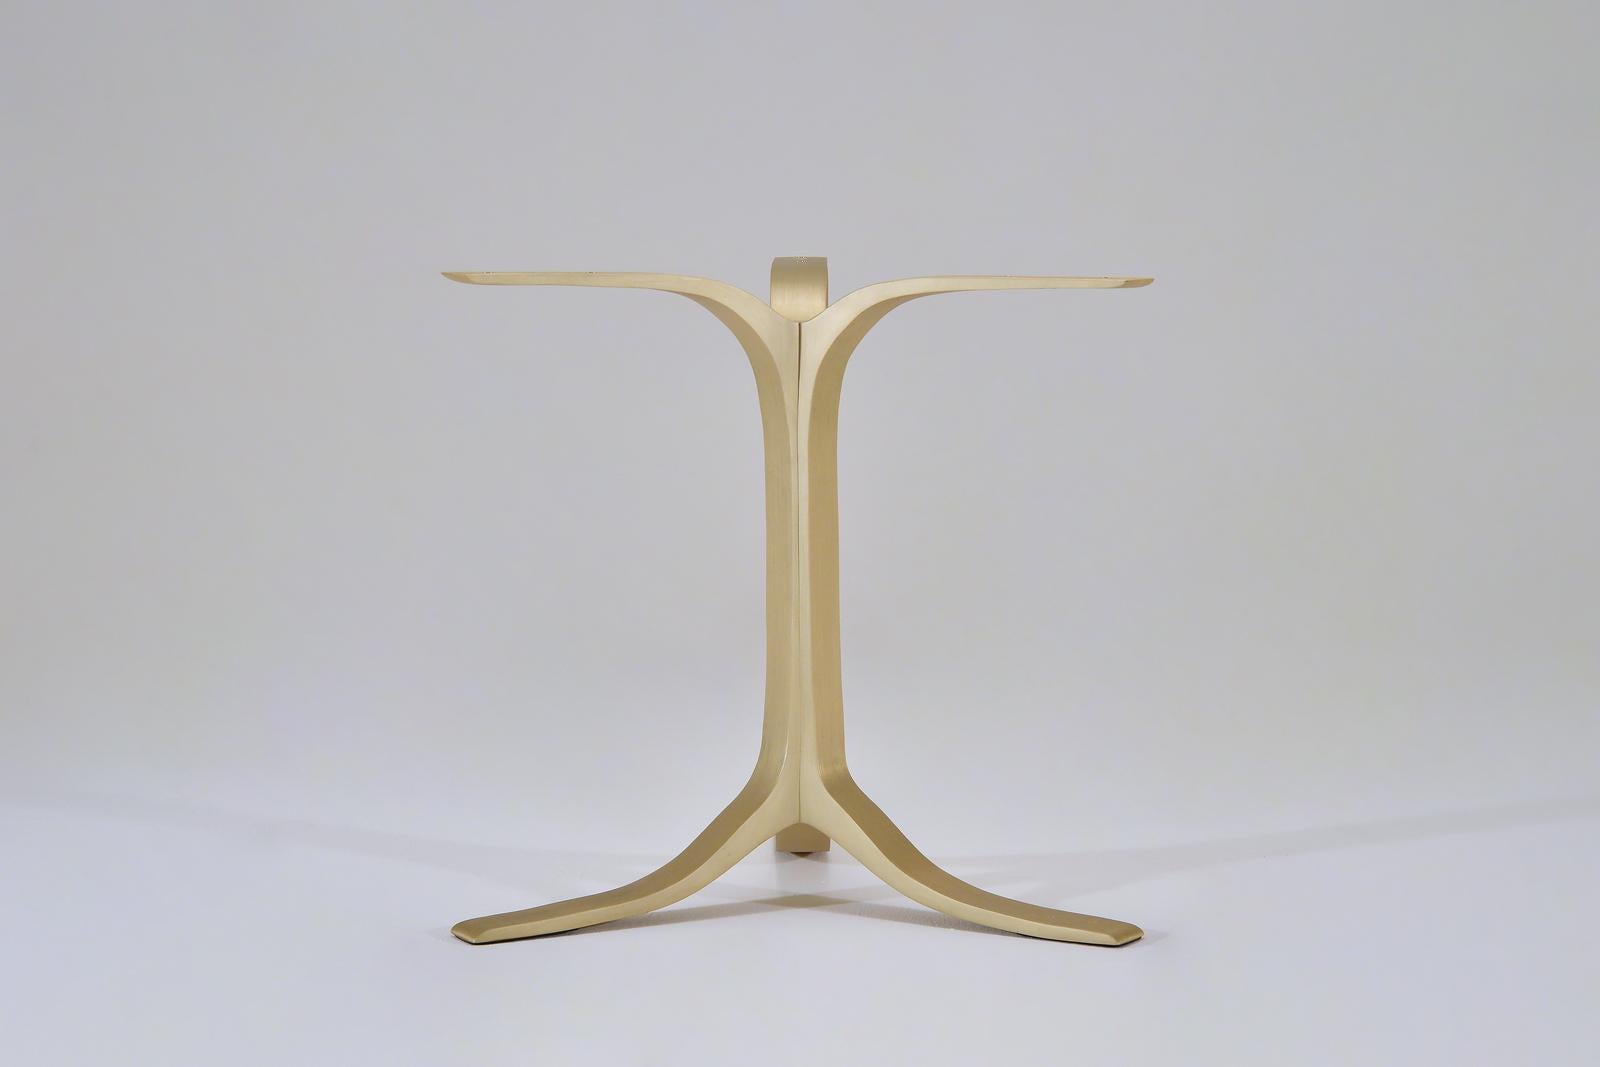 Minimalist Bespoke Sand-Cast Brass Table Base with Golden Sand Finish PT12 by P. Tendercool For Sale